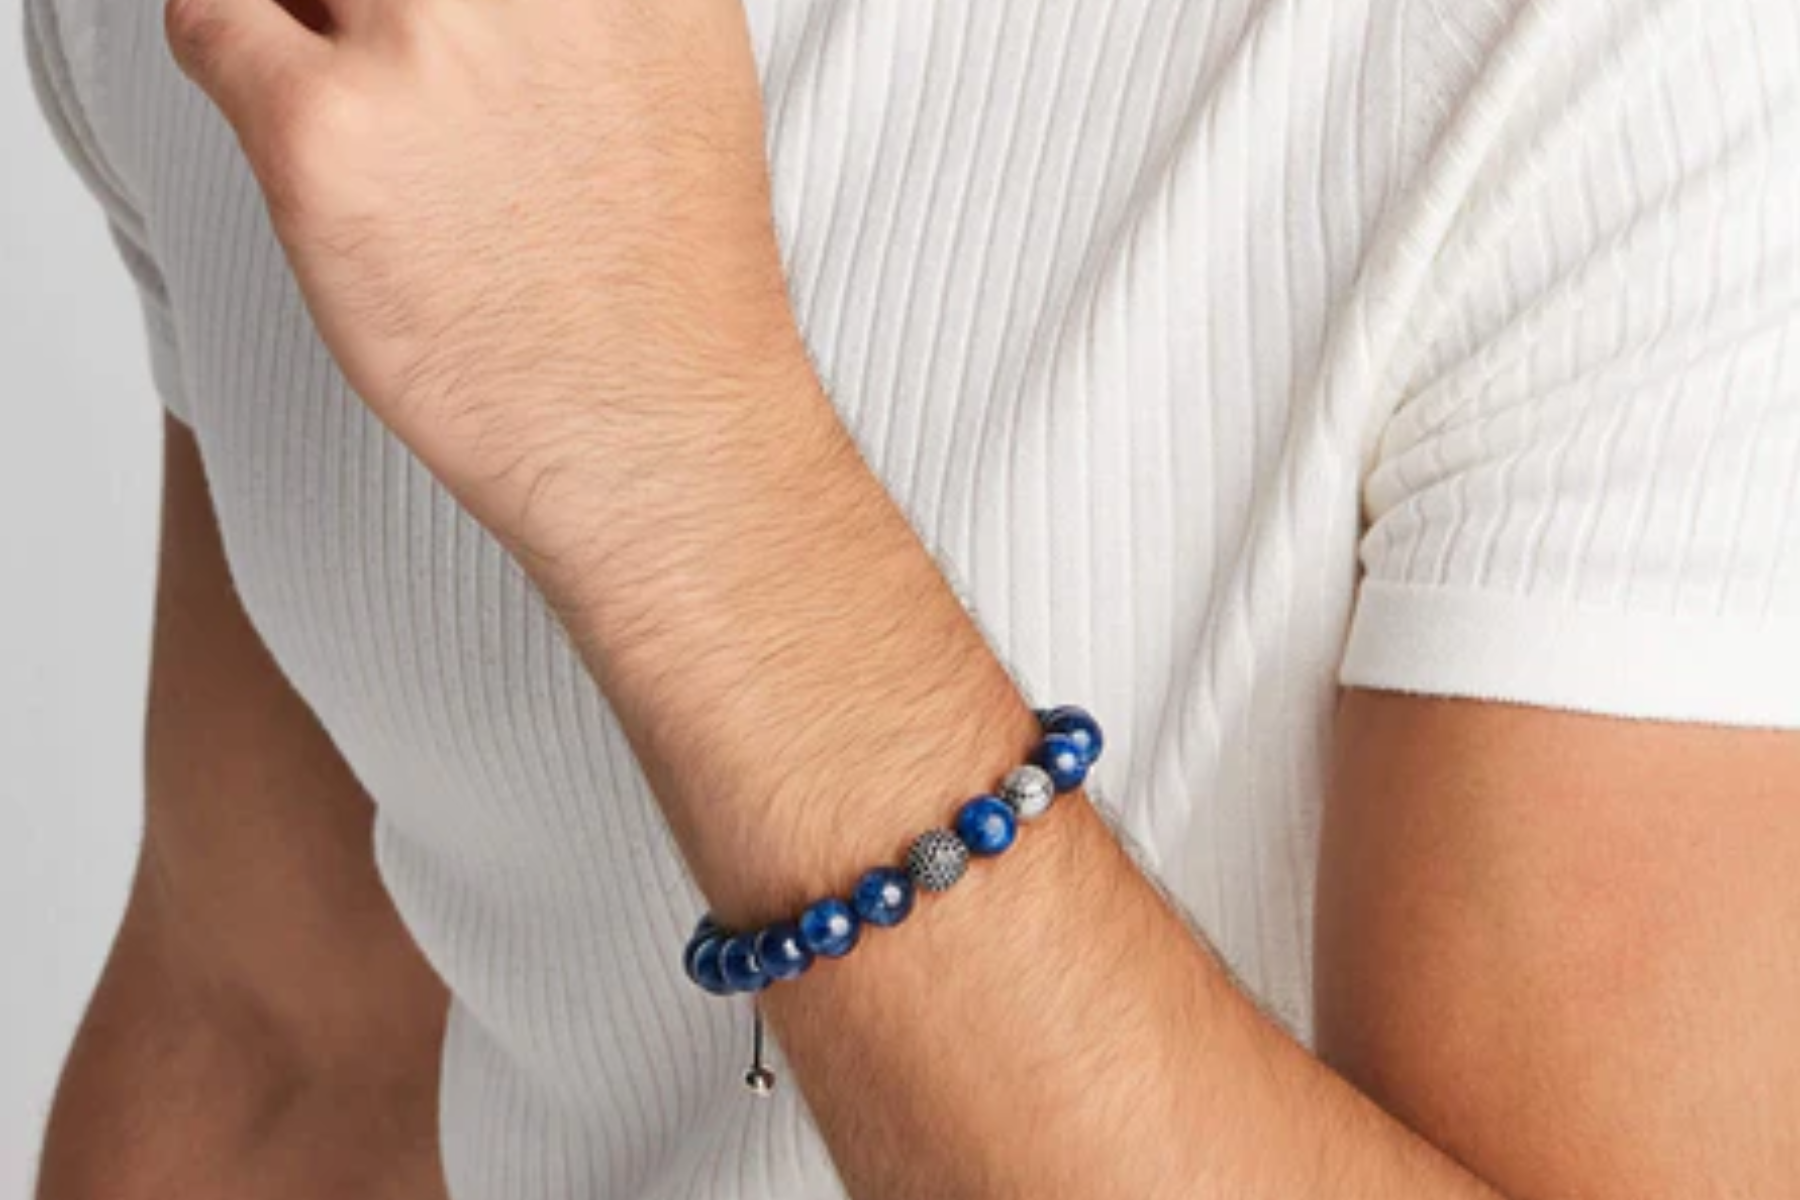 A man in a white shirt wearing blue beaded jewelry with two gray beads as accents